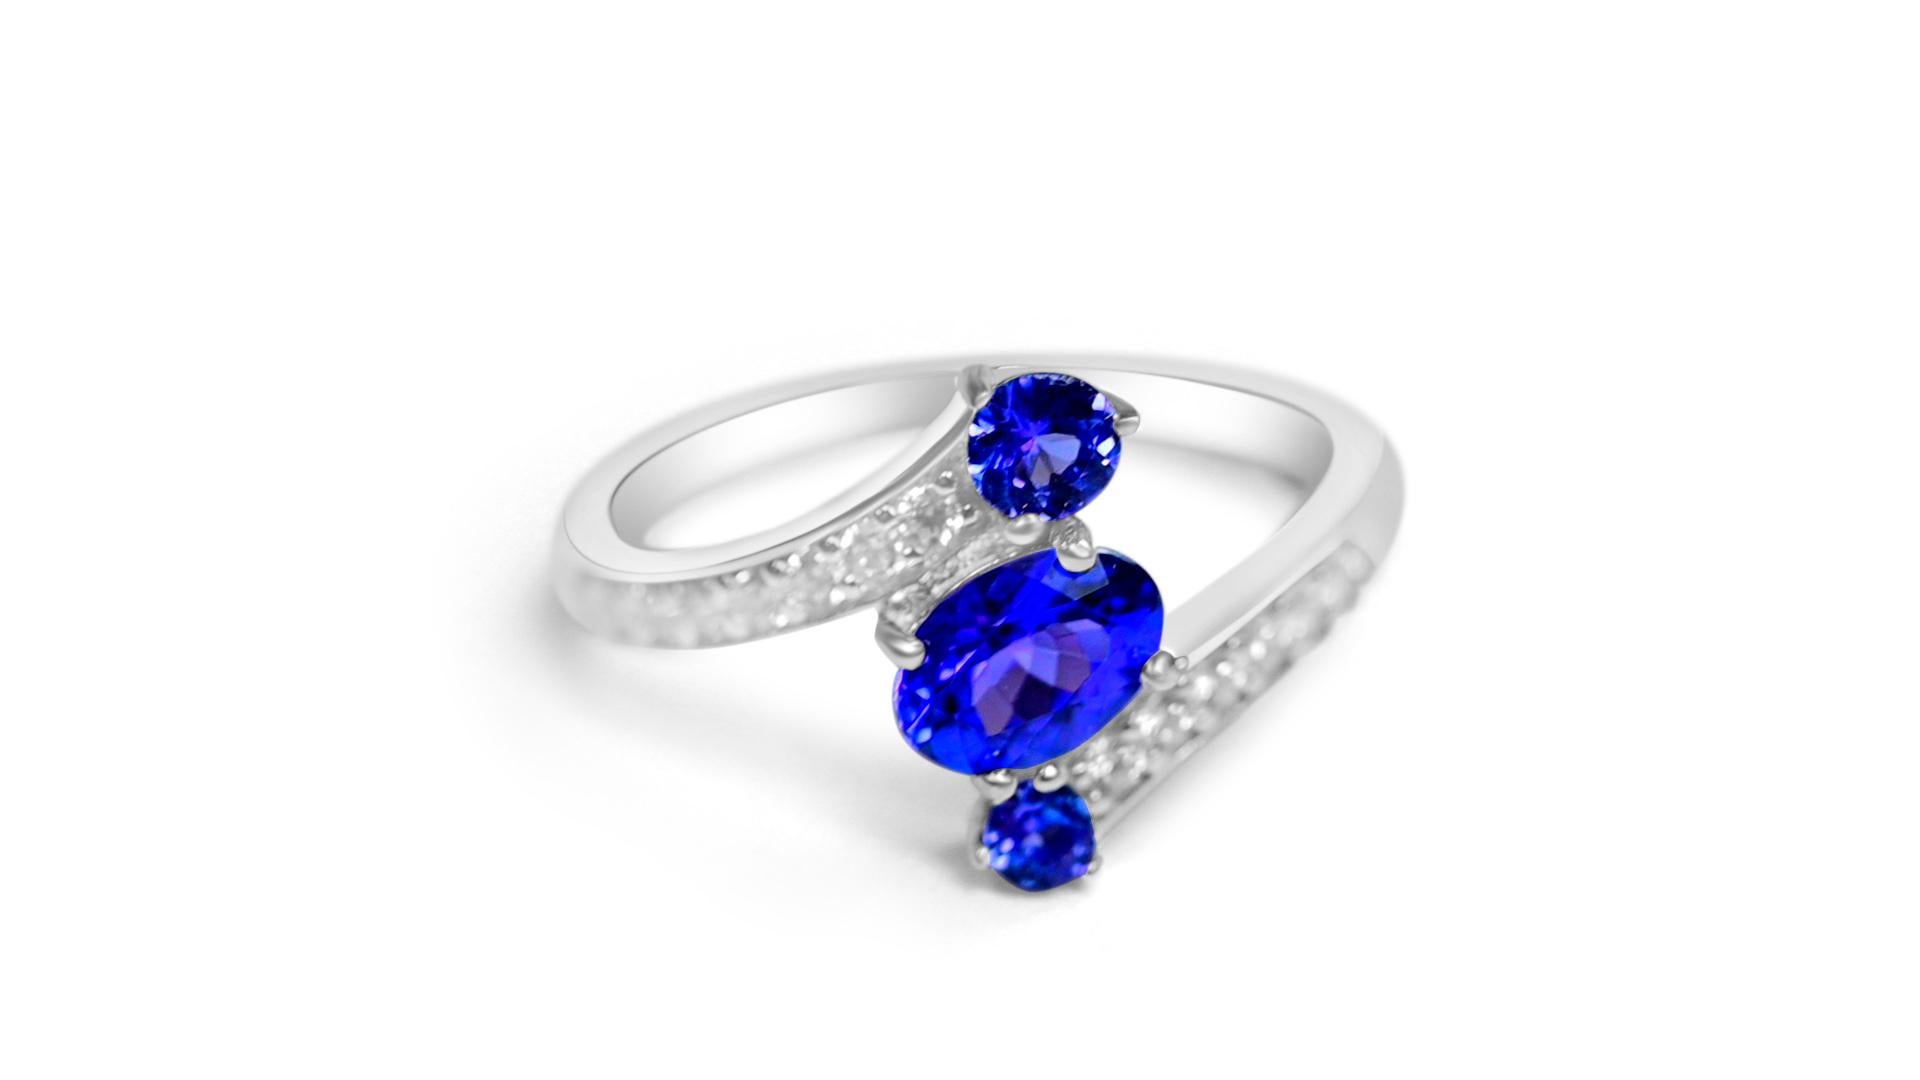 Blue Star Gems NY LLC ! Discover popular engagement ring & wedding ring designs from classic to vintage inspired. We offer Joyful jewelry for everyday wear. Just for you. We go above and beyond the current industry standards to offer conflict-free